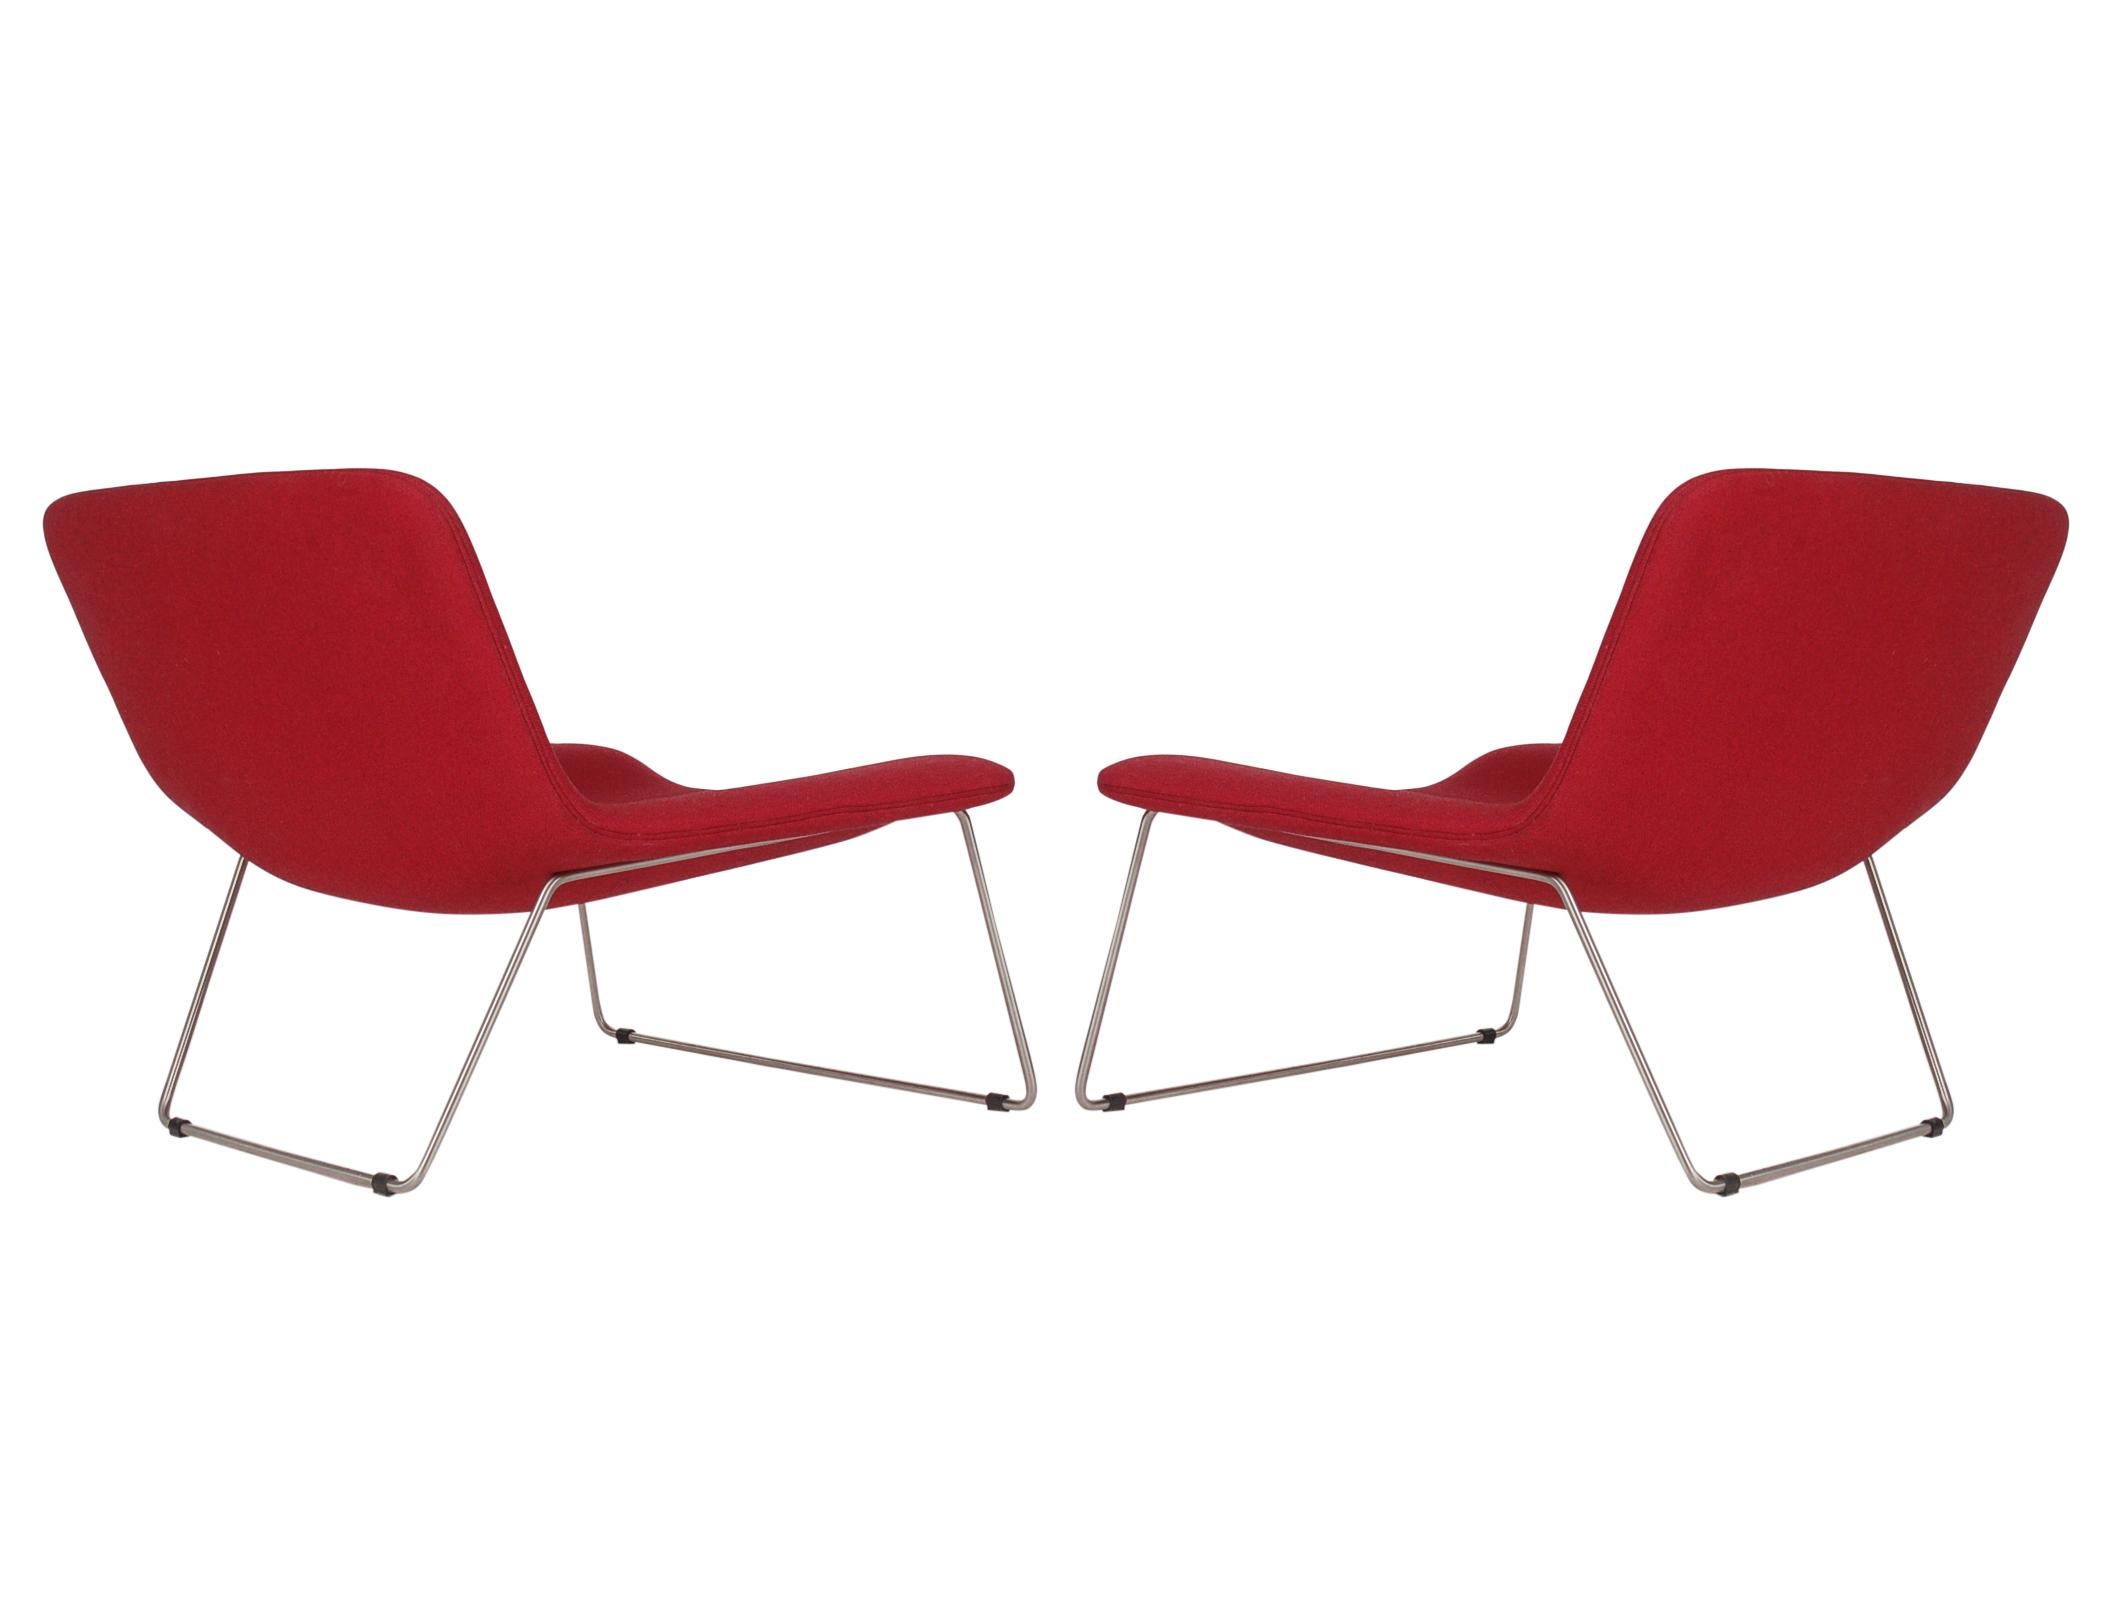 Matching Pair of Midcentury Italian Postmodern Red Lounge Chairs by Cappellini For Sale 3